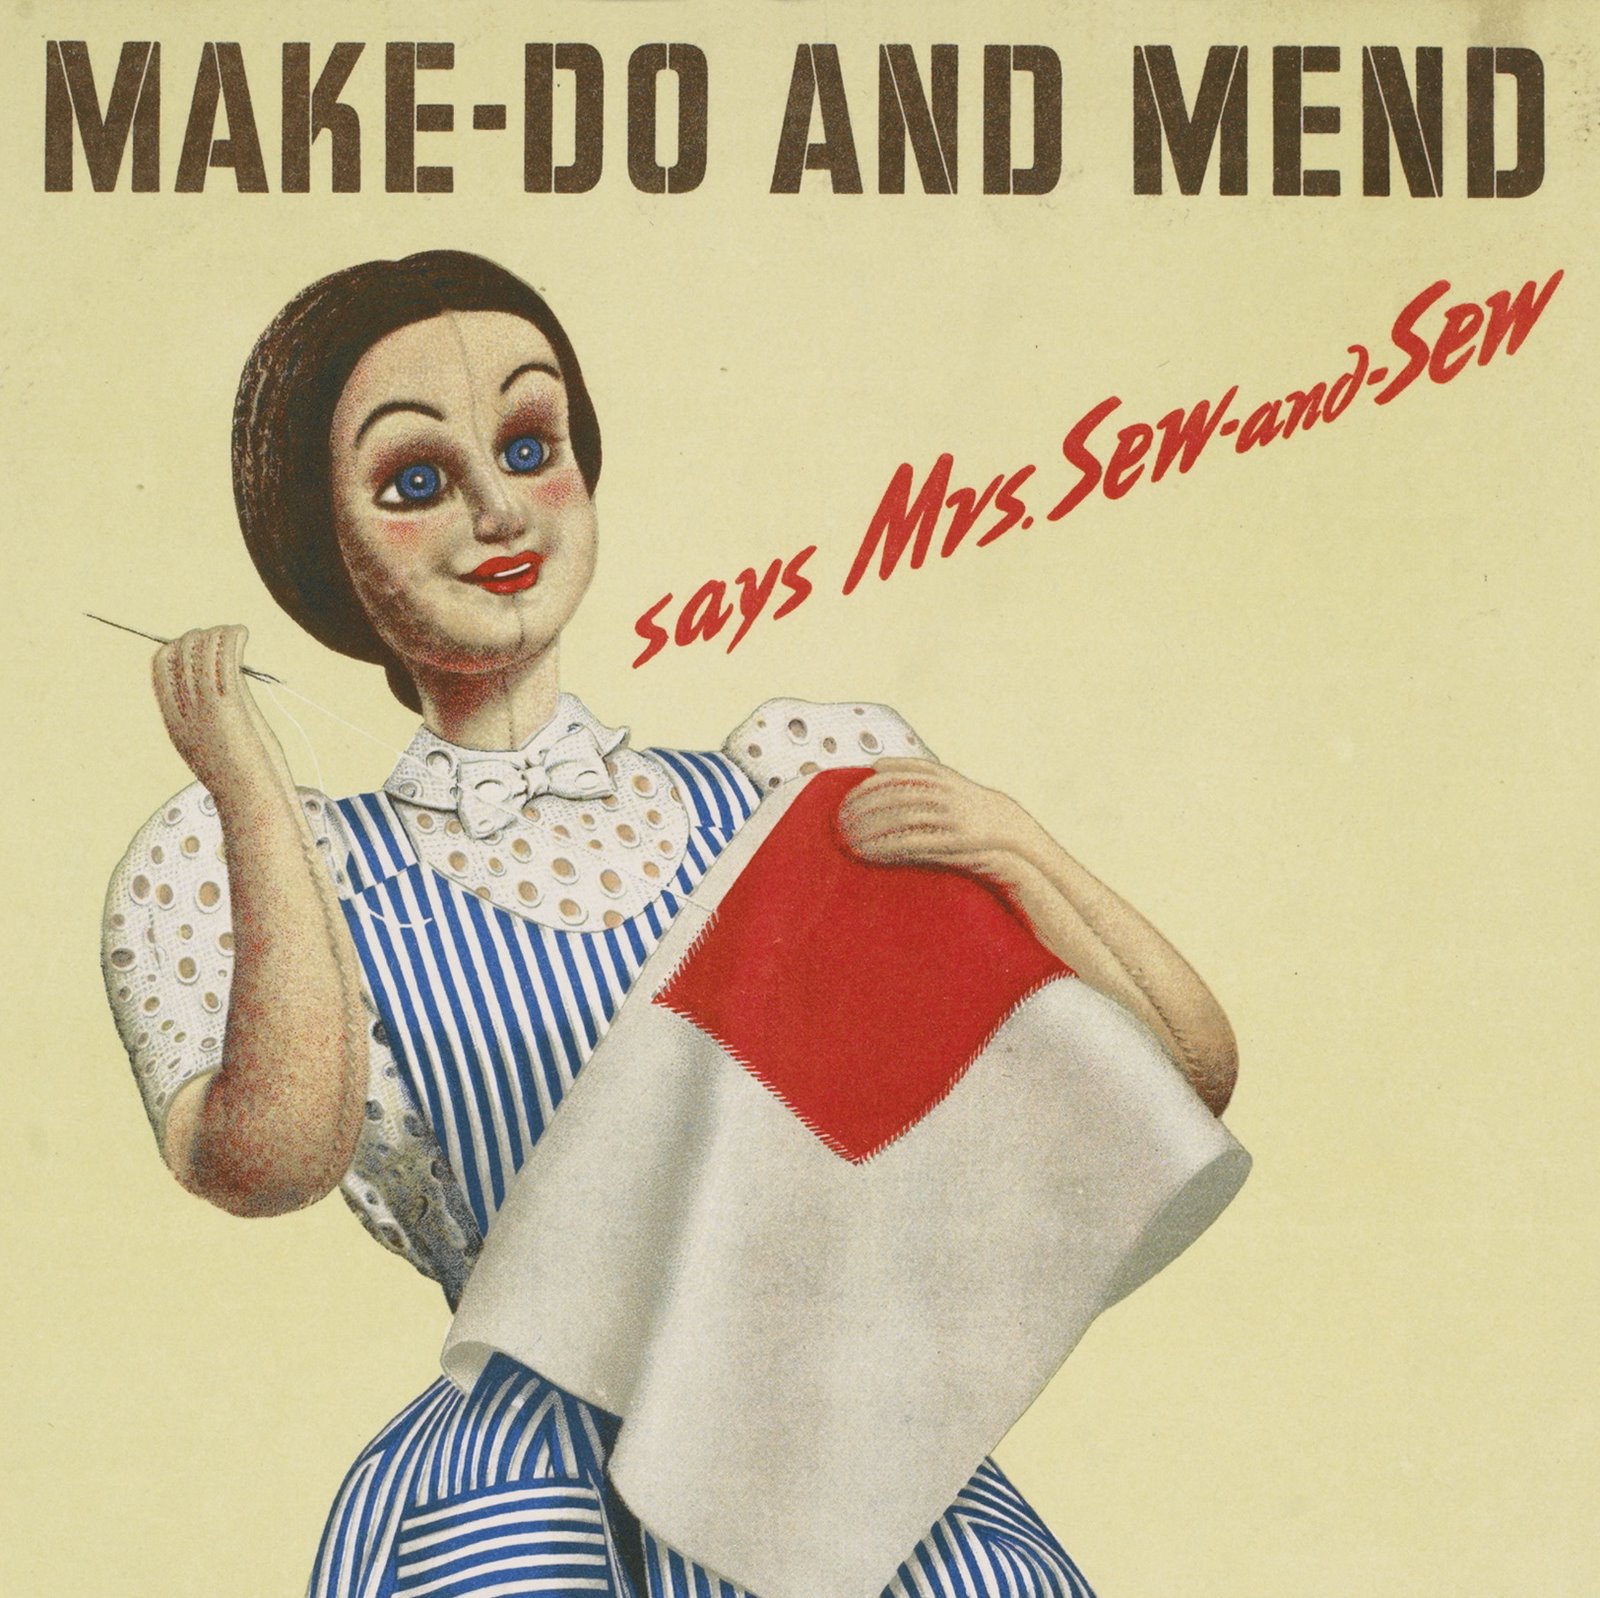 Make do and mend poster from World War 2